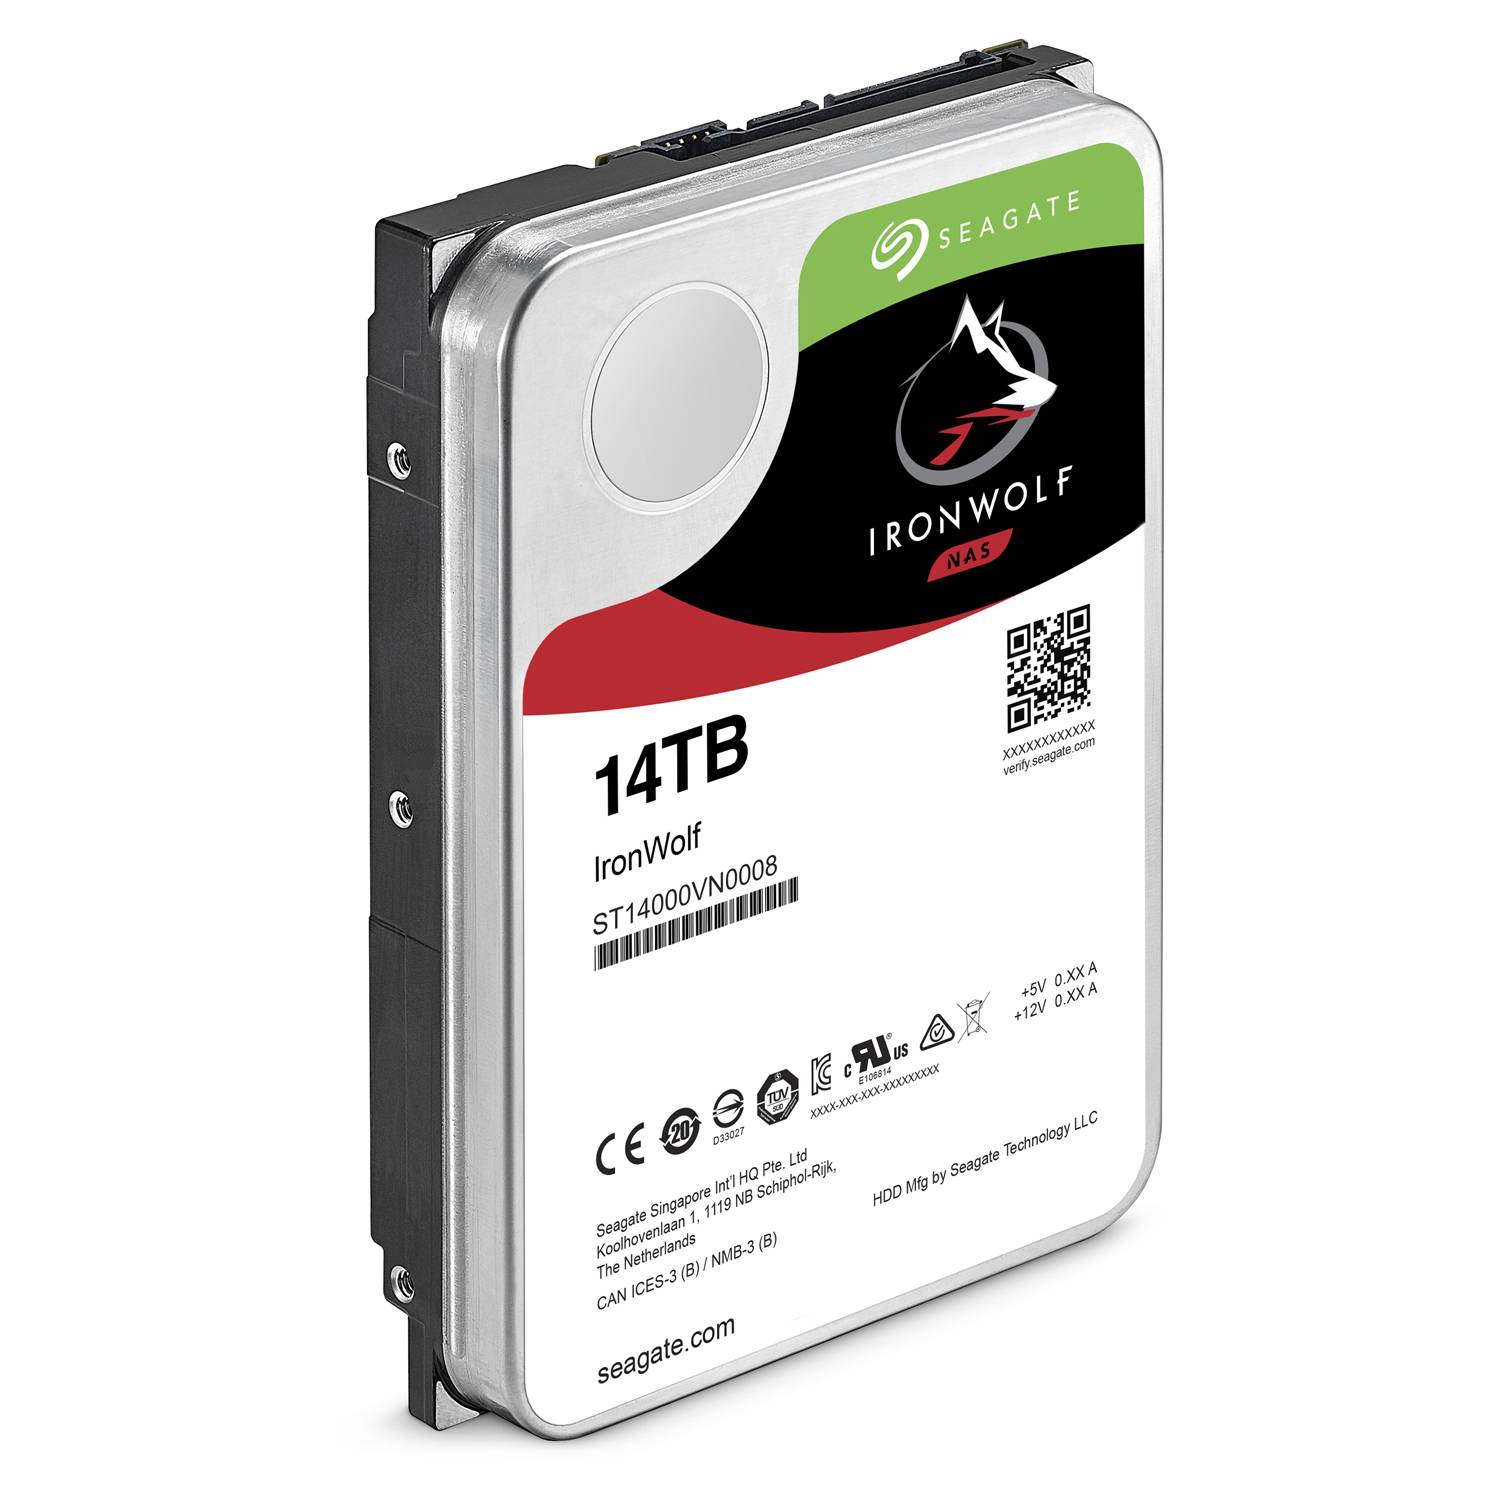 HD Seagate IronWolf NAS HDD 14TB  - Rei dos HDs